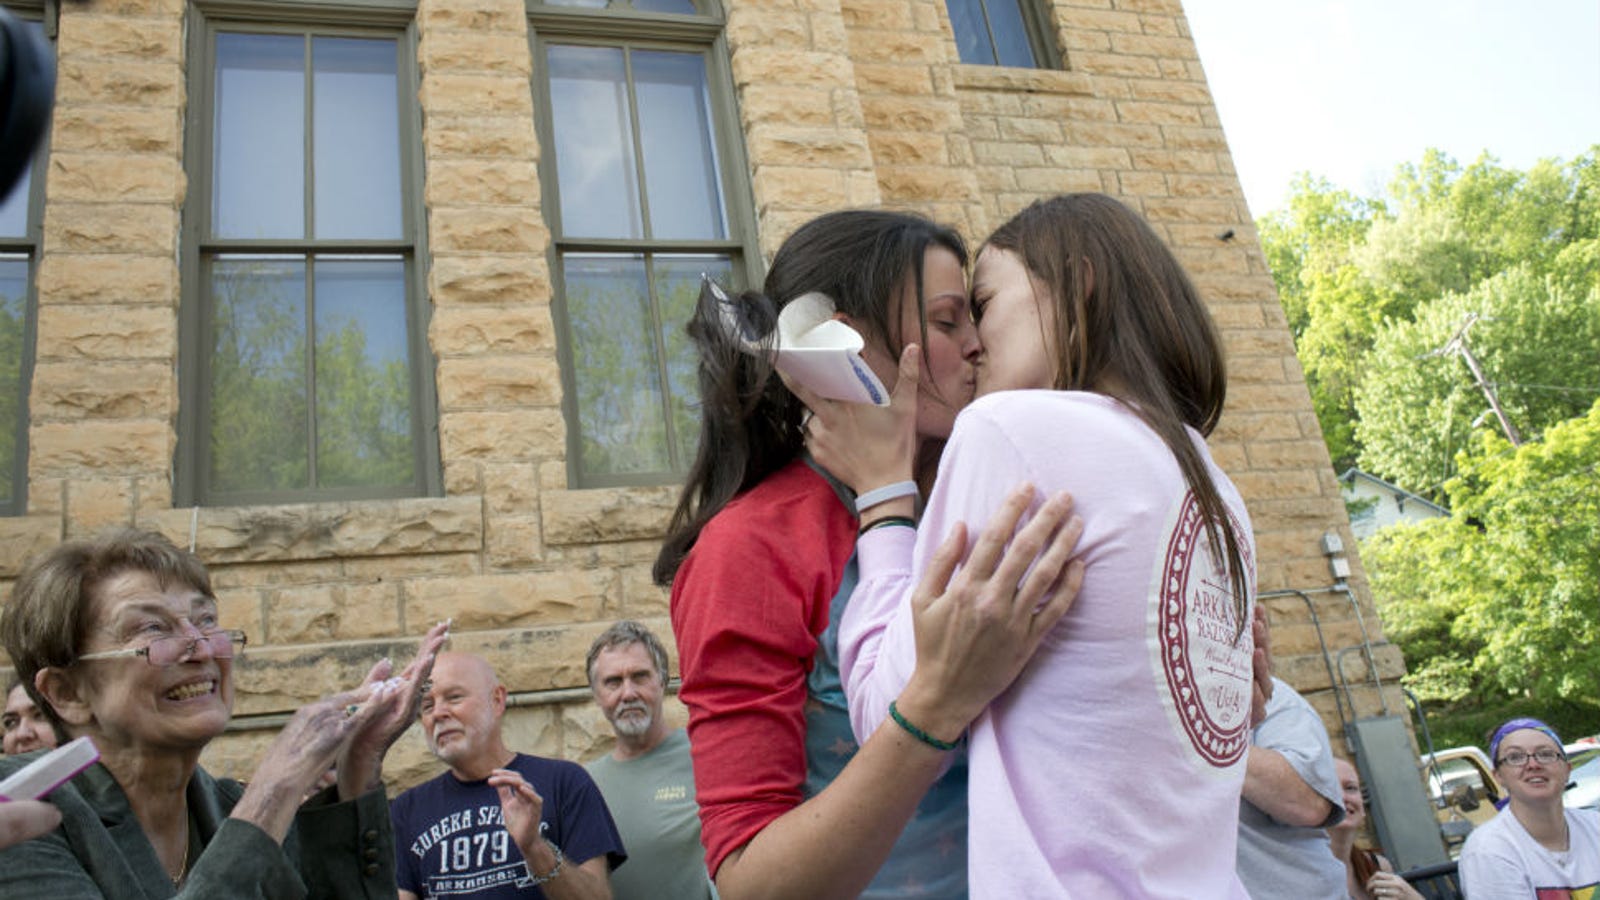 Two Women Make History By Getting Married In Arkansas